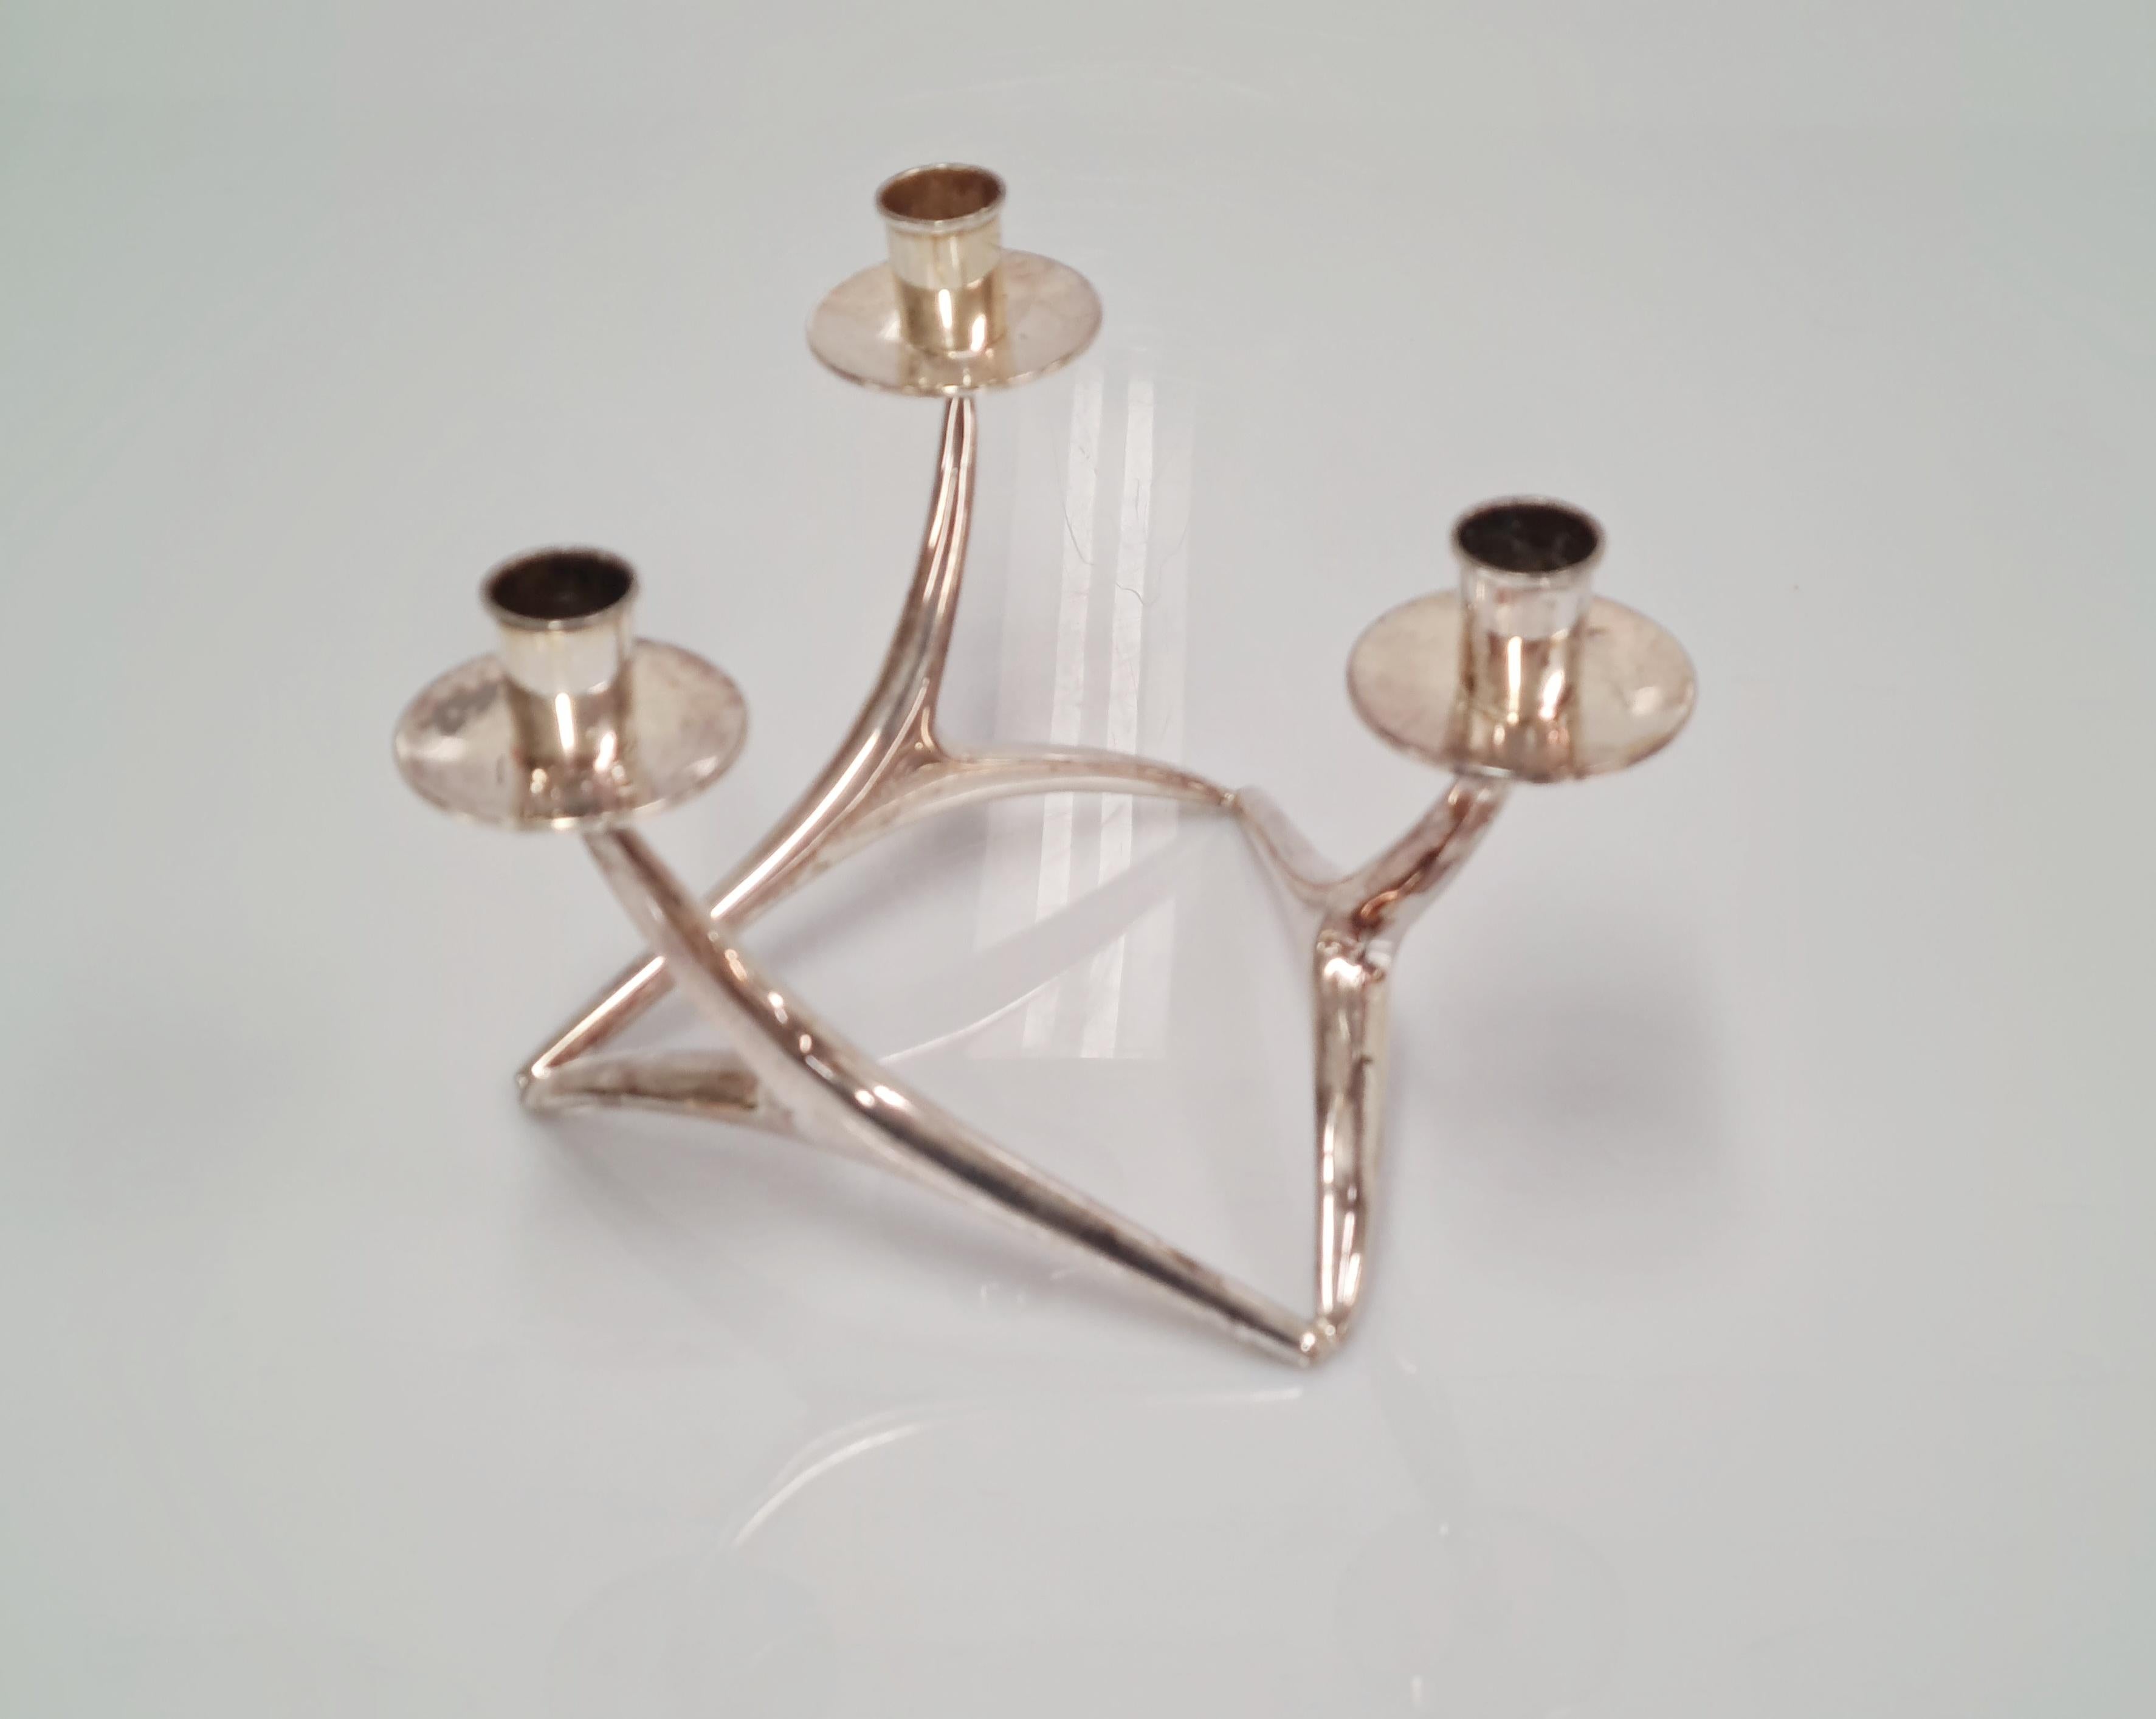 A very beautiful candleholder designed by Anna Greta-Eker. This piece is a part of a very well known series of candle holders in different sizes and shapes but in this similar distinctive design by Anna Greta-Eker. This one in particular is amongst